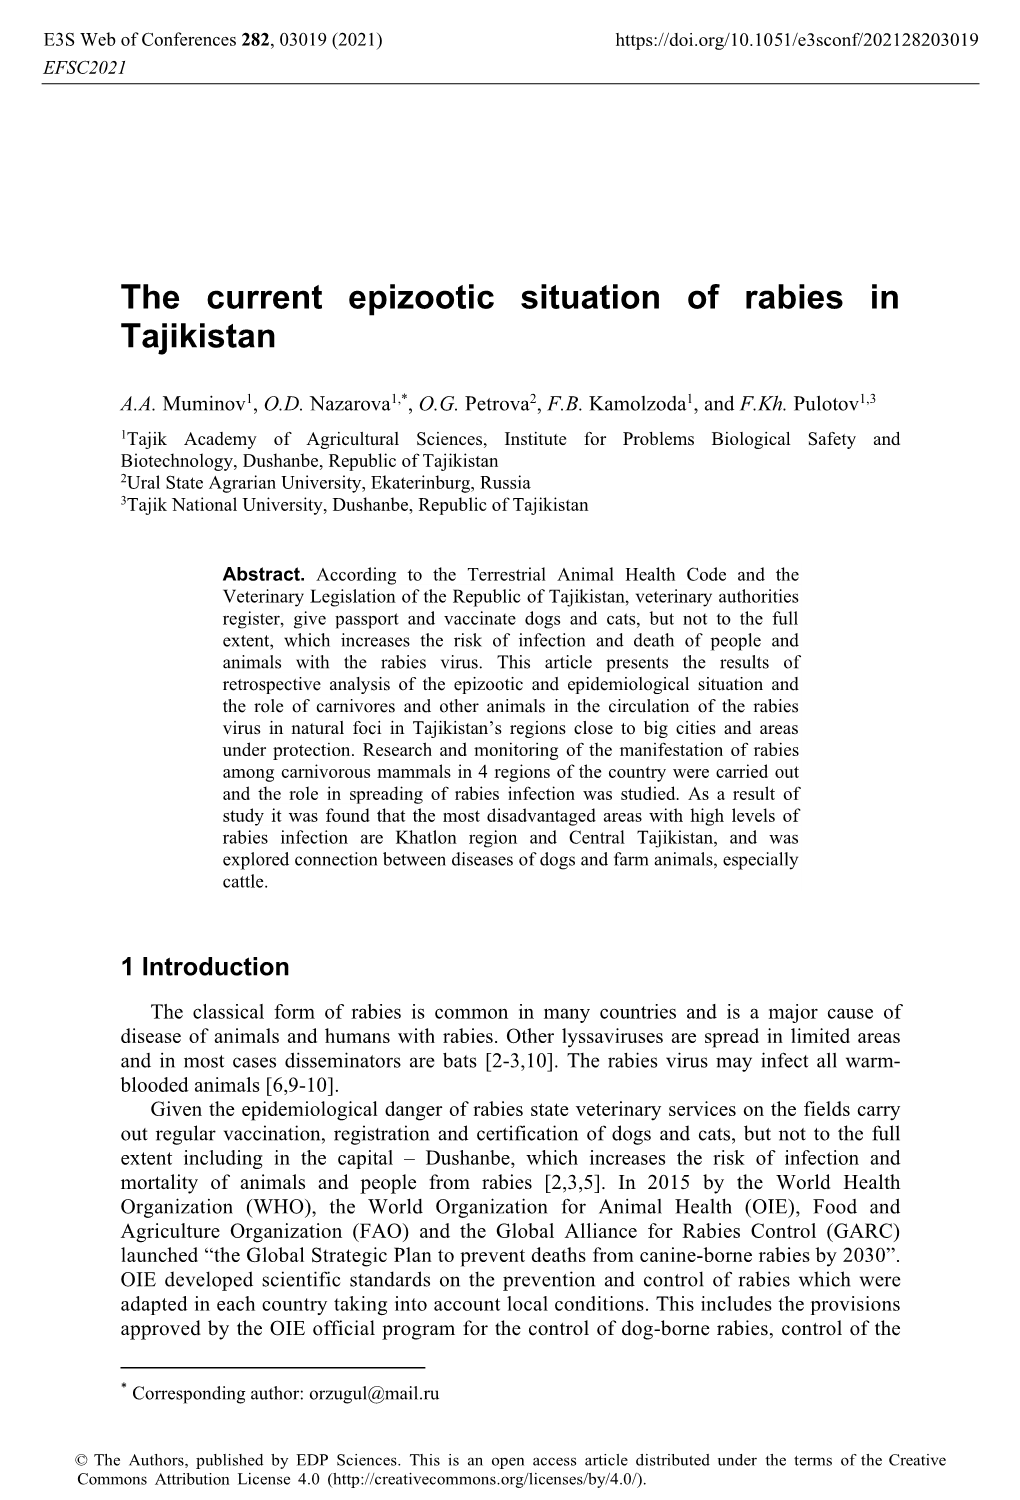 The Current Epizootic Situation of Rabies in Tajikistan